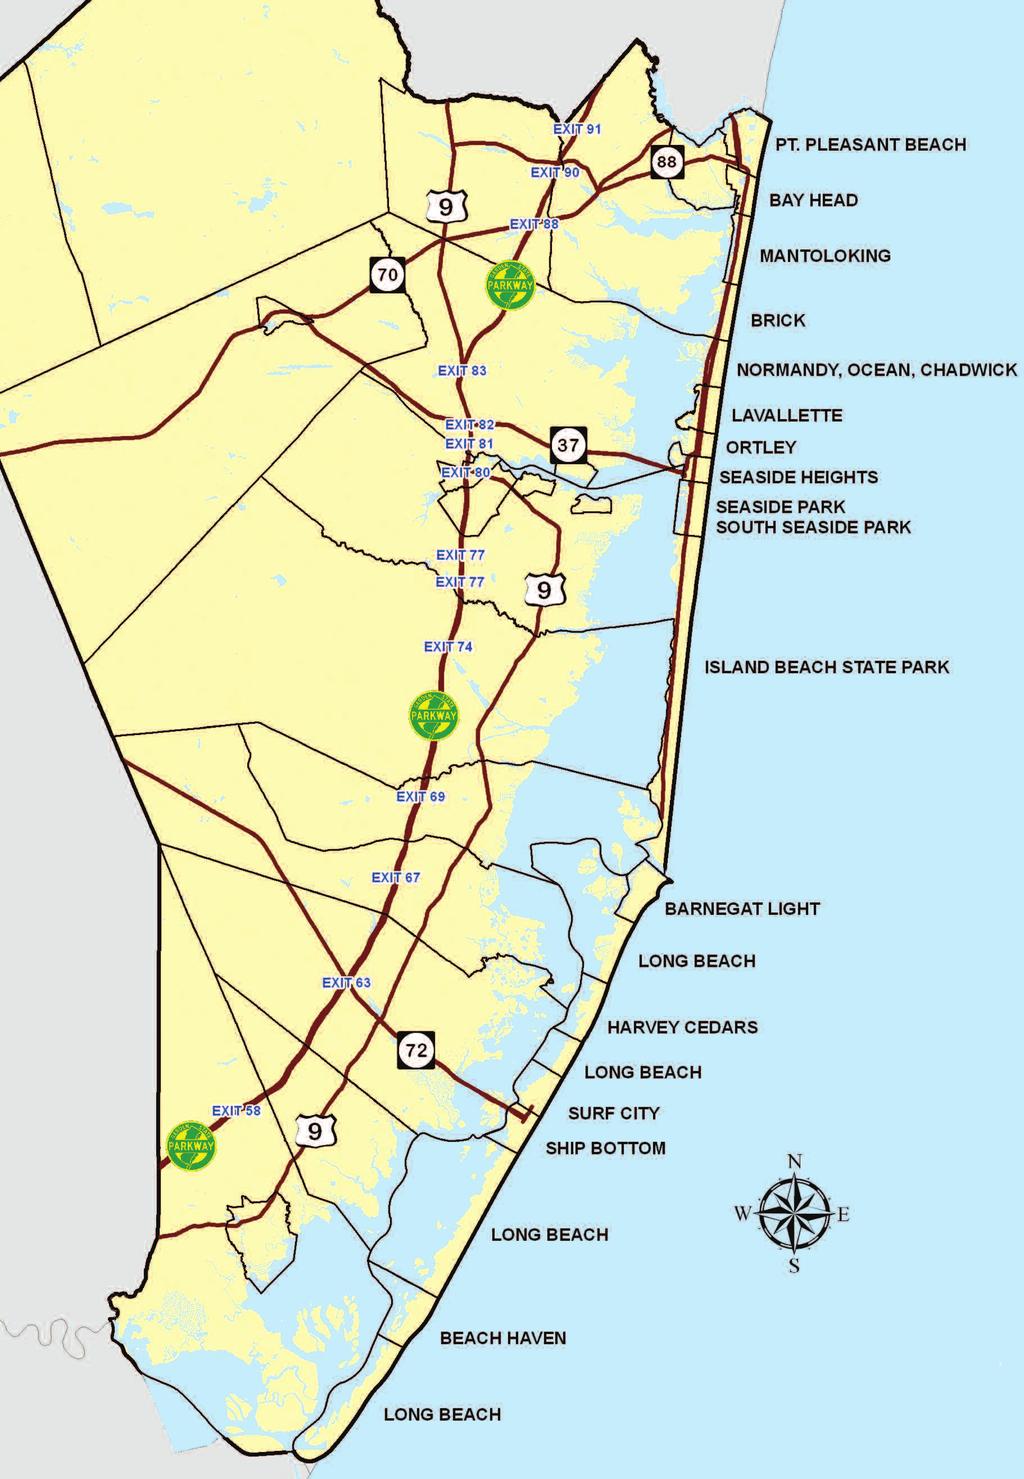 Welcome to Ocean County s 2012 Guide to Accessible Beaches. This guide includes information about the County s accessible beaches, walkways, ramps, parking and surf chair availability.